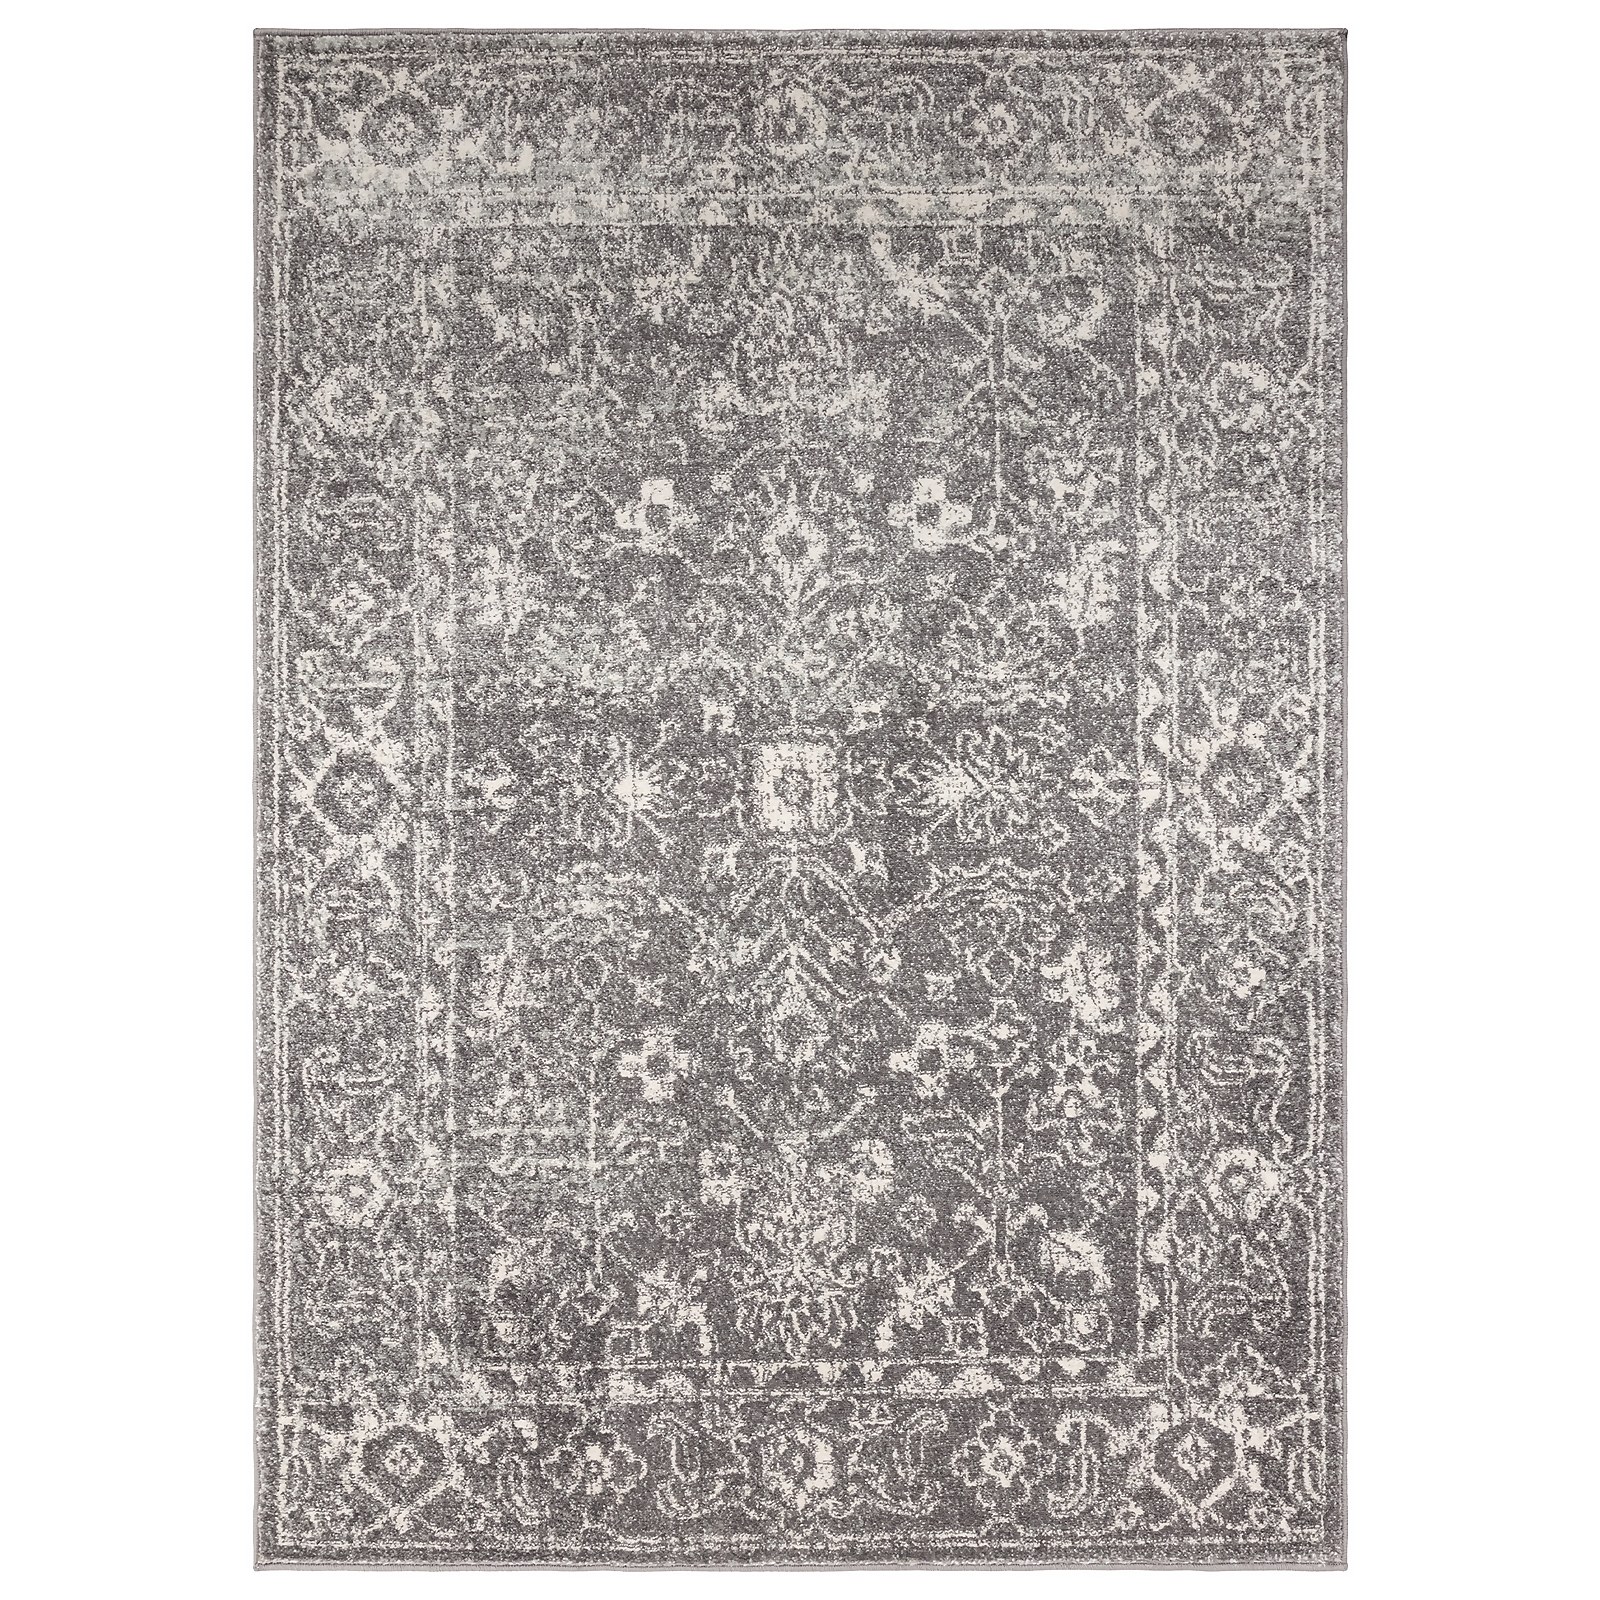 Photo of Traditional Rug - Grey - 120x170cm